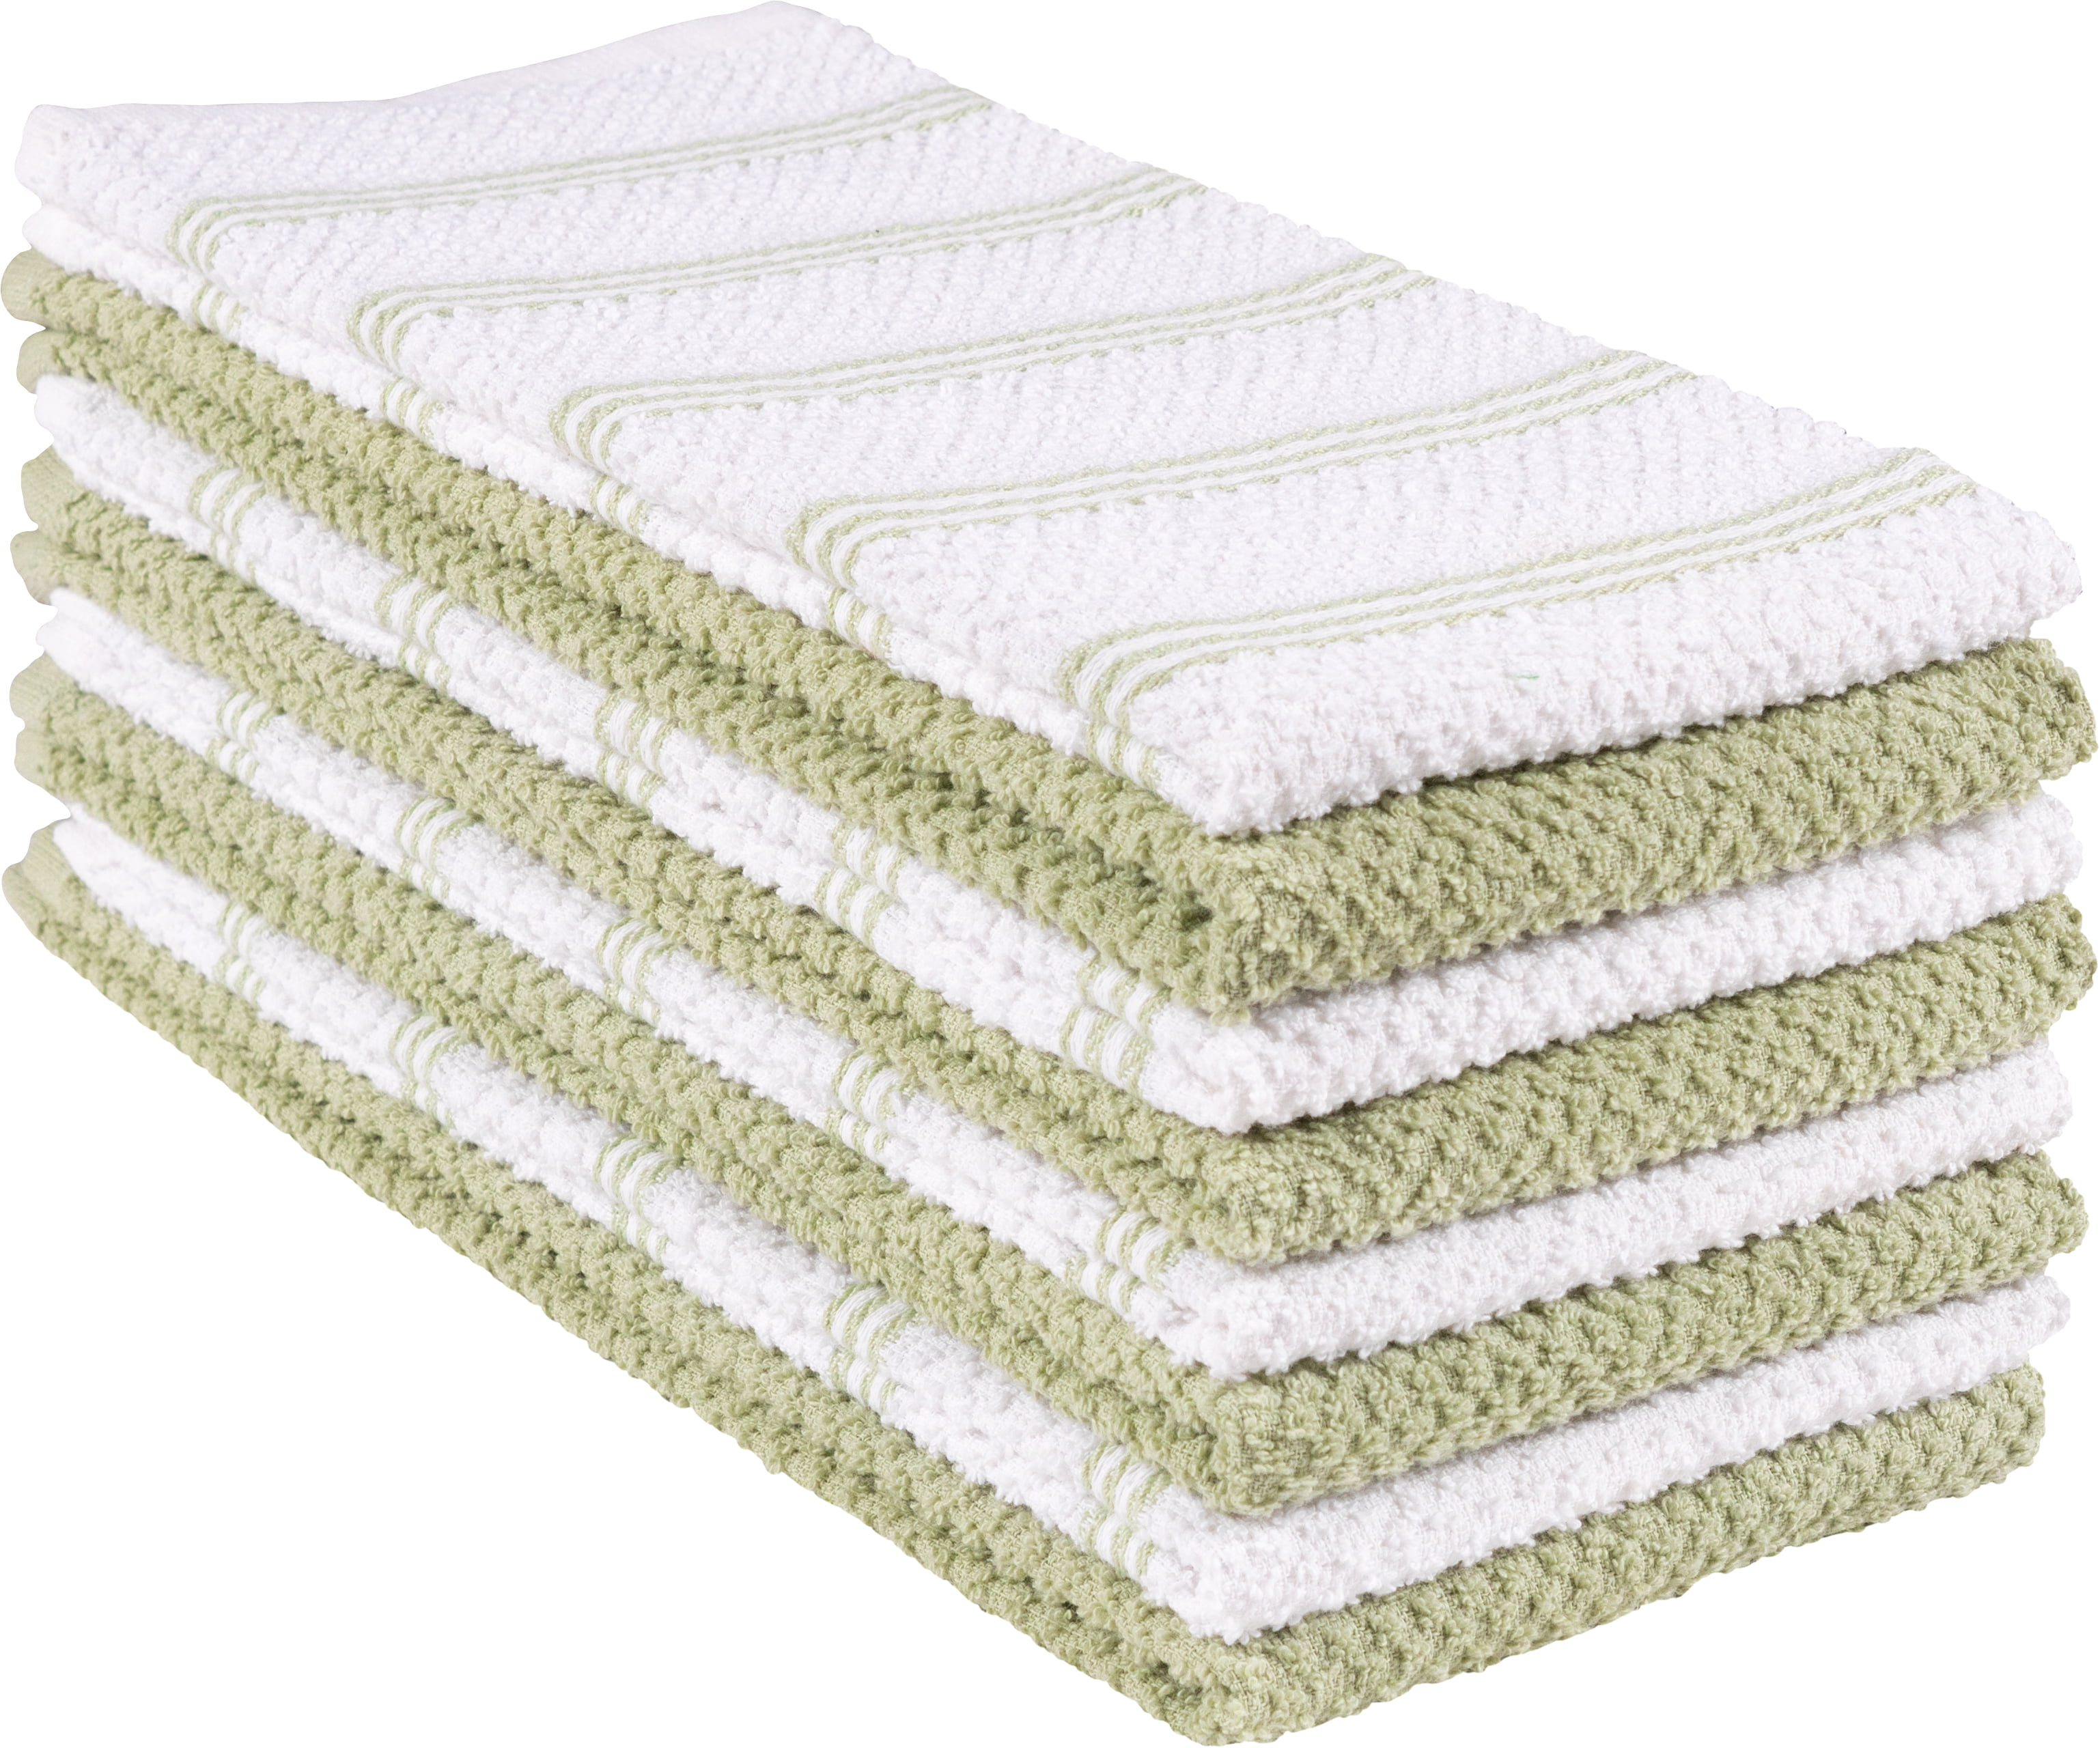 ZOYER Kitchen Towels (12 Pack, White) - 100% Cotton Lint Free Dish Towels - Resuable 15 x 25 inch Tea Towels - Super Absorbent Cleaning Cloth Towel